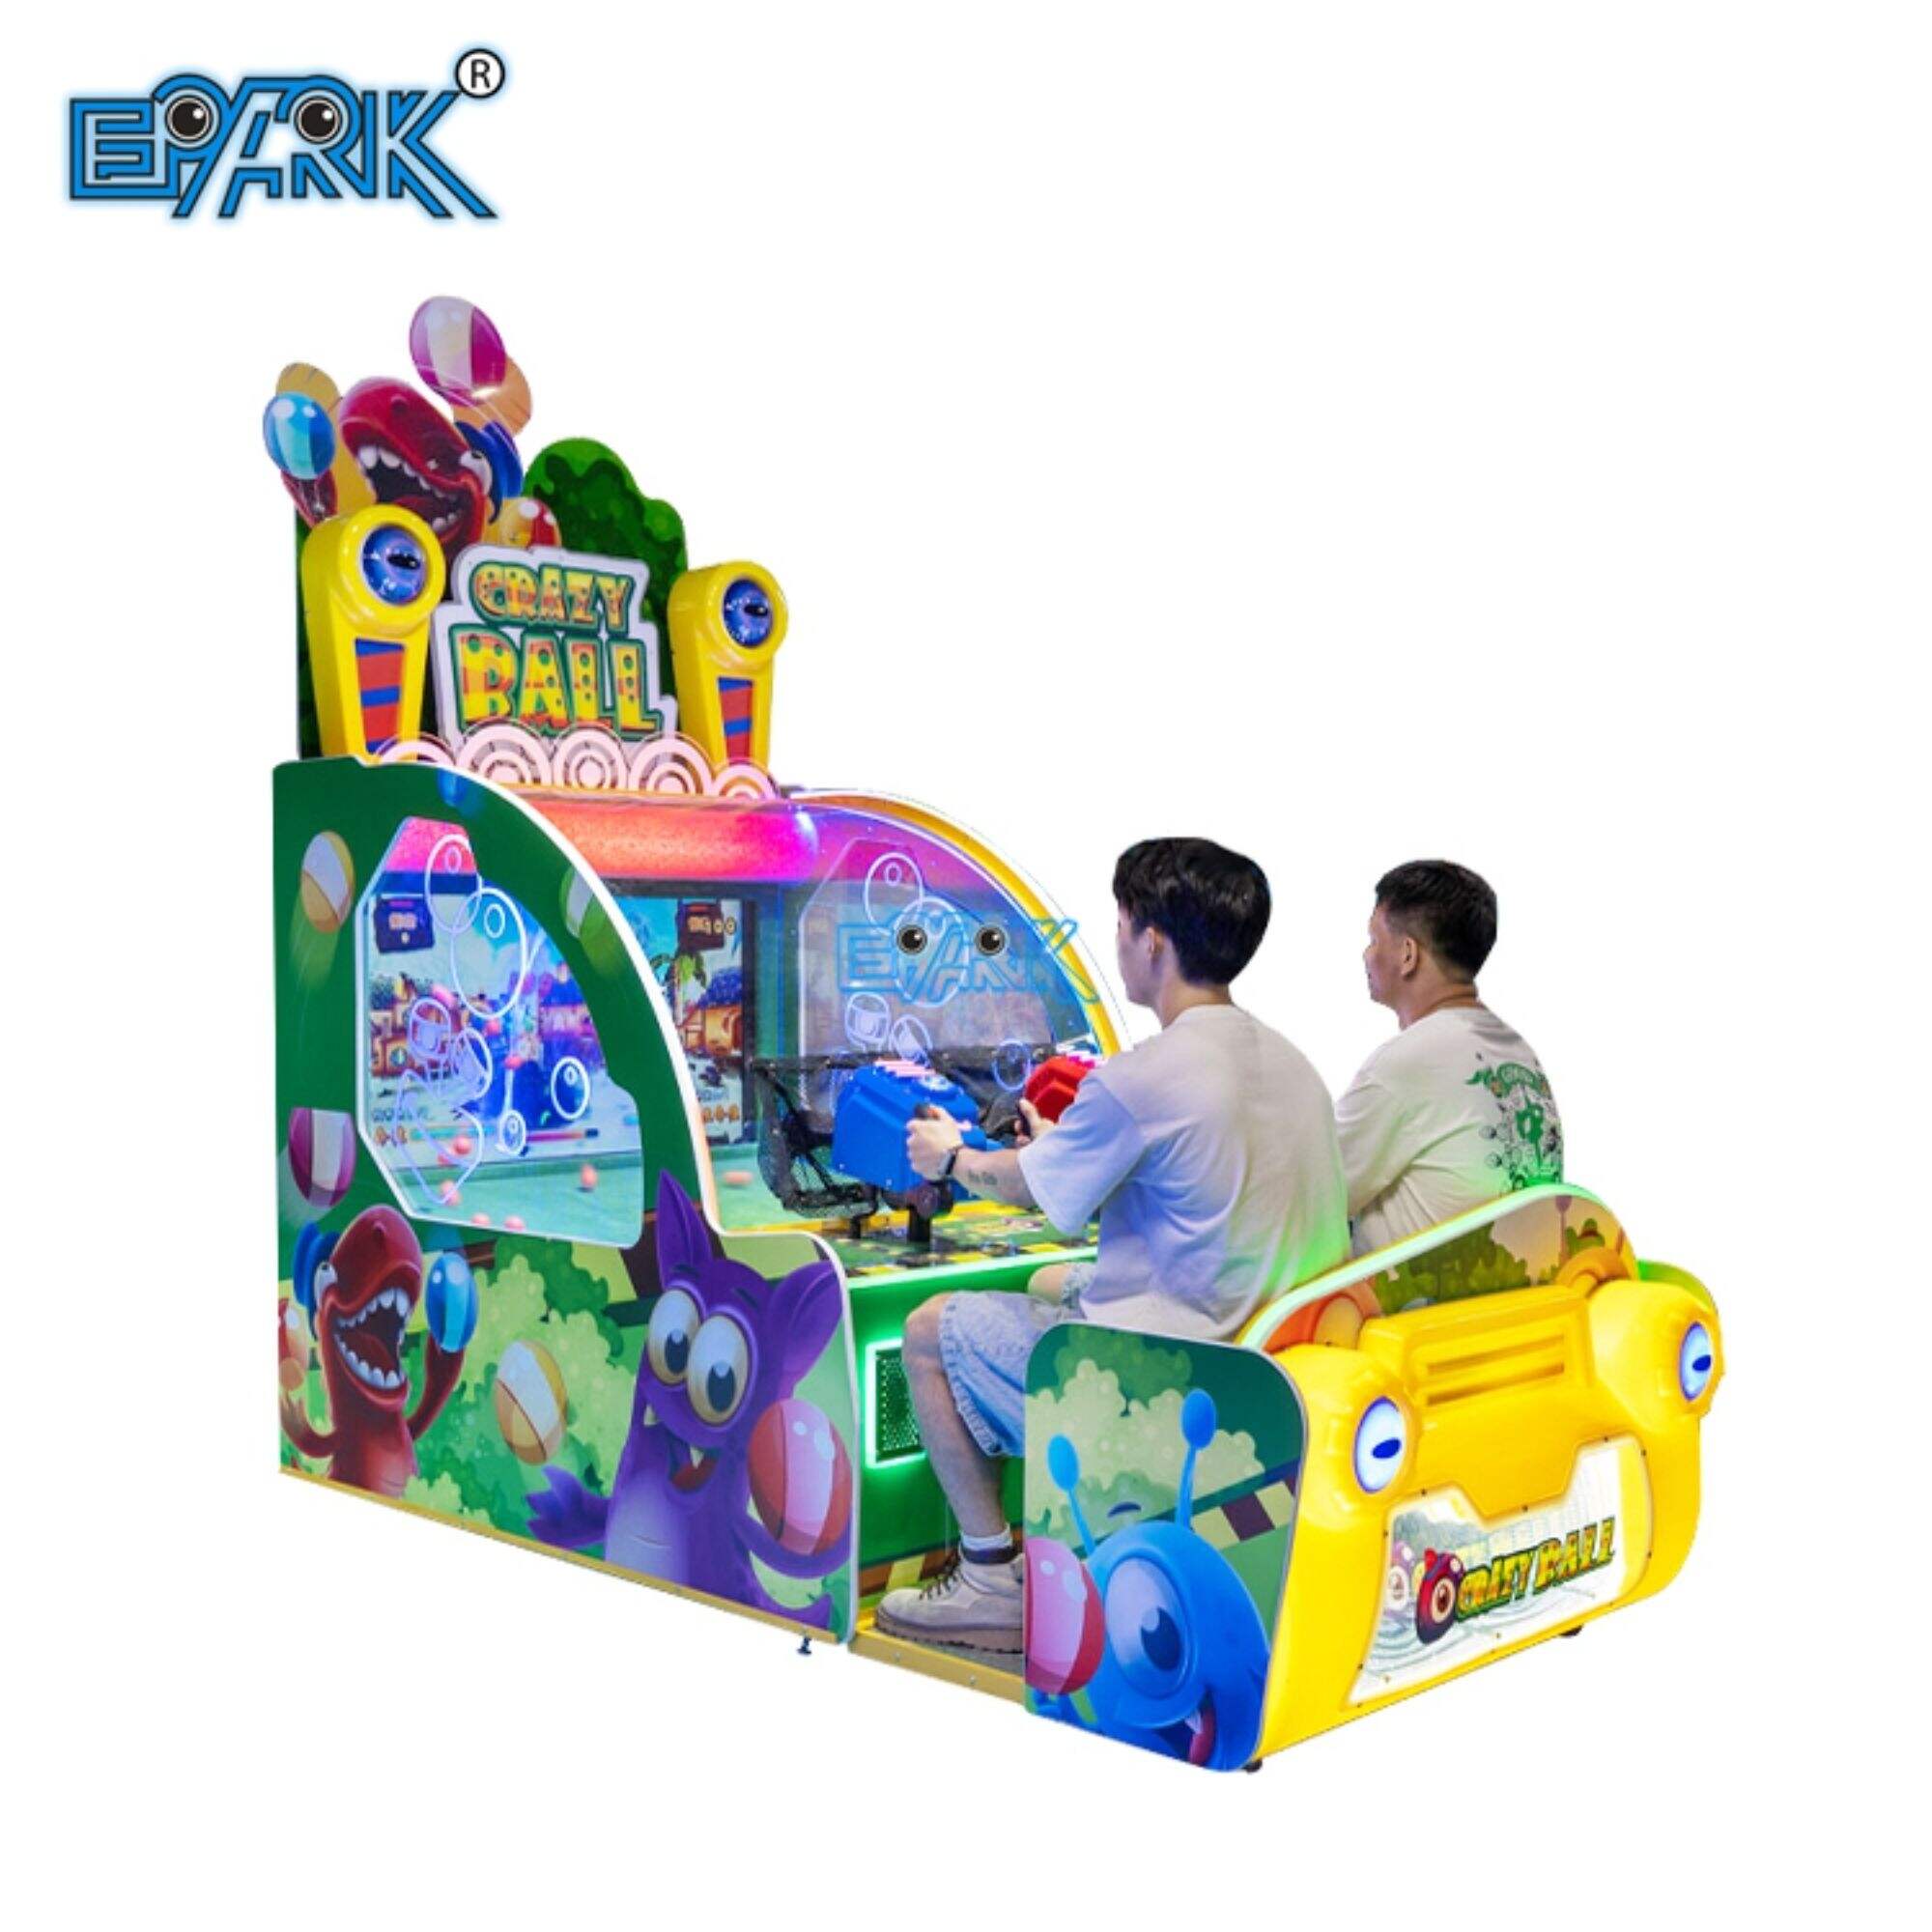 42 Inch Coin Operated Kids Game Machine Ball Shooting Arcade Coin Pusher Game